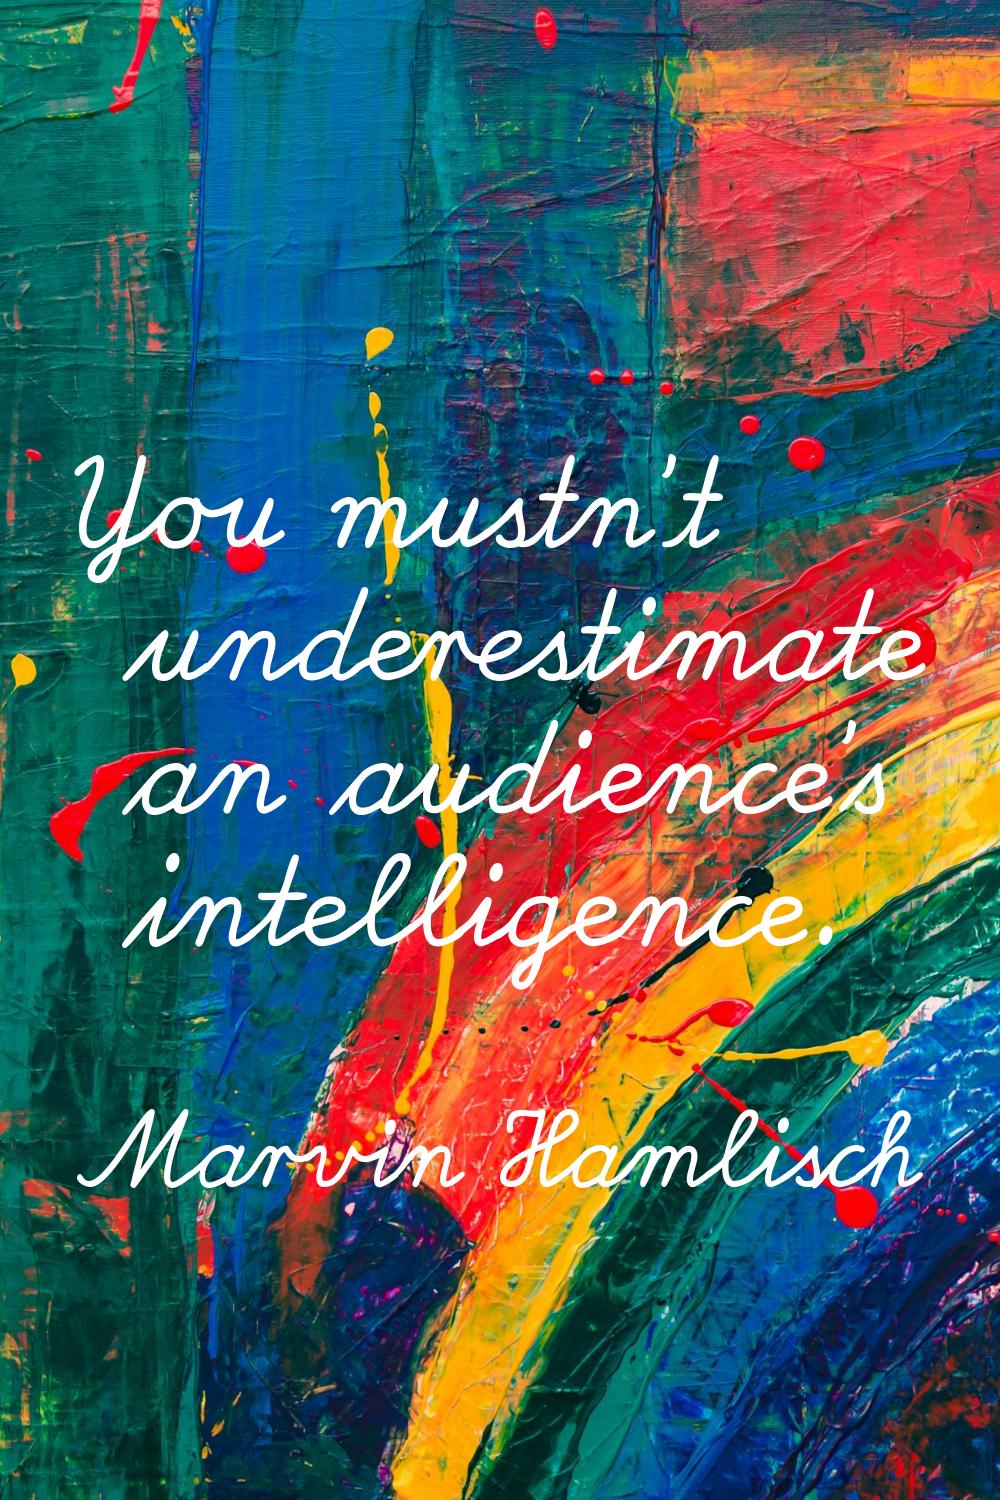 You mustn't underestimate an audience's intelligence.